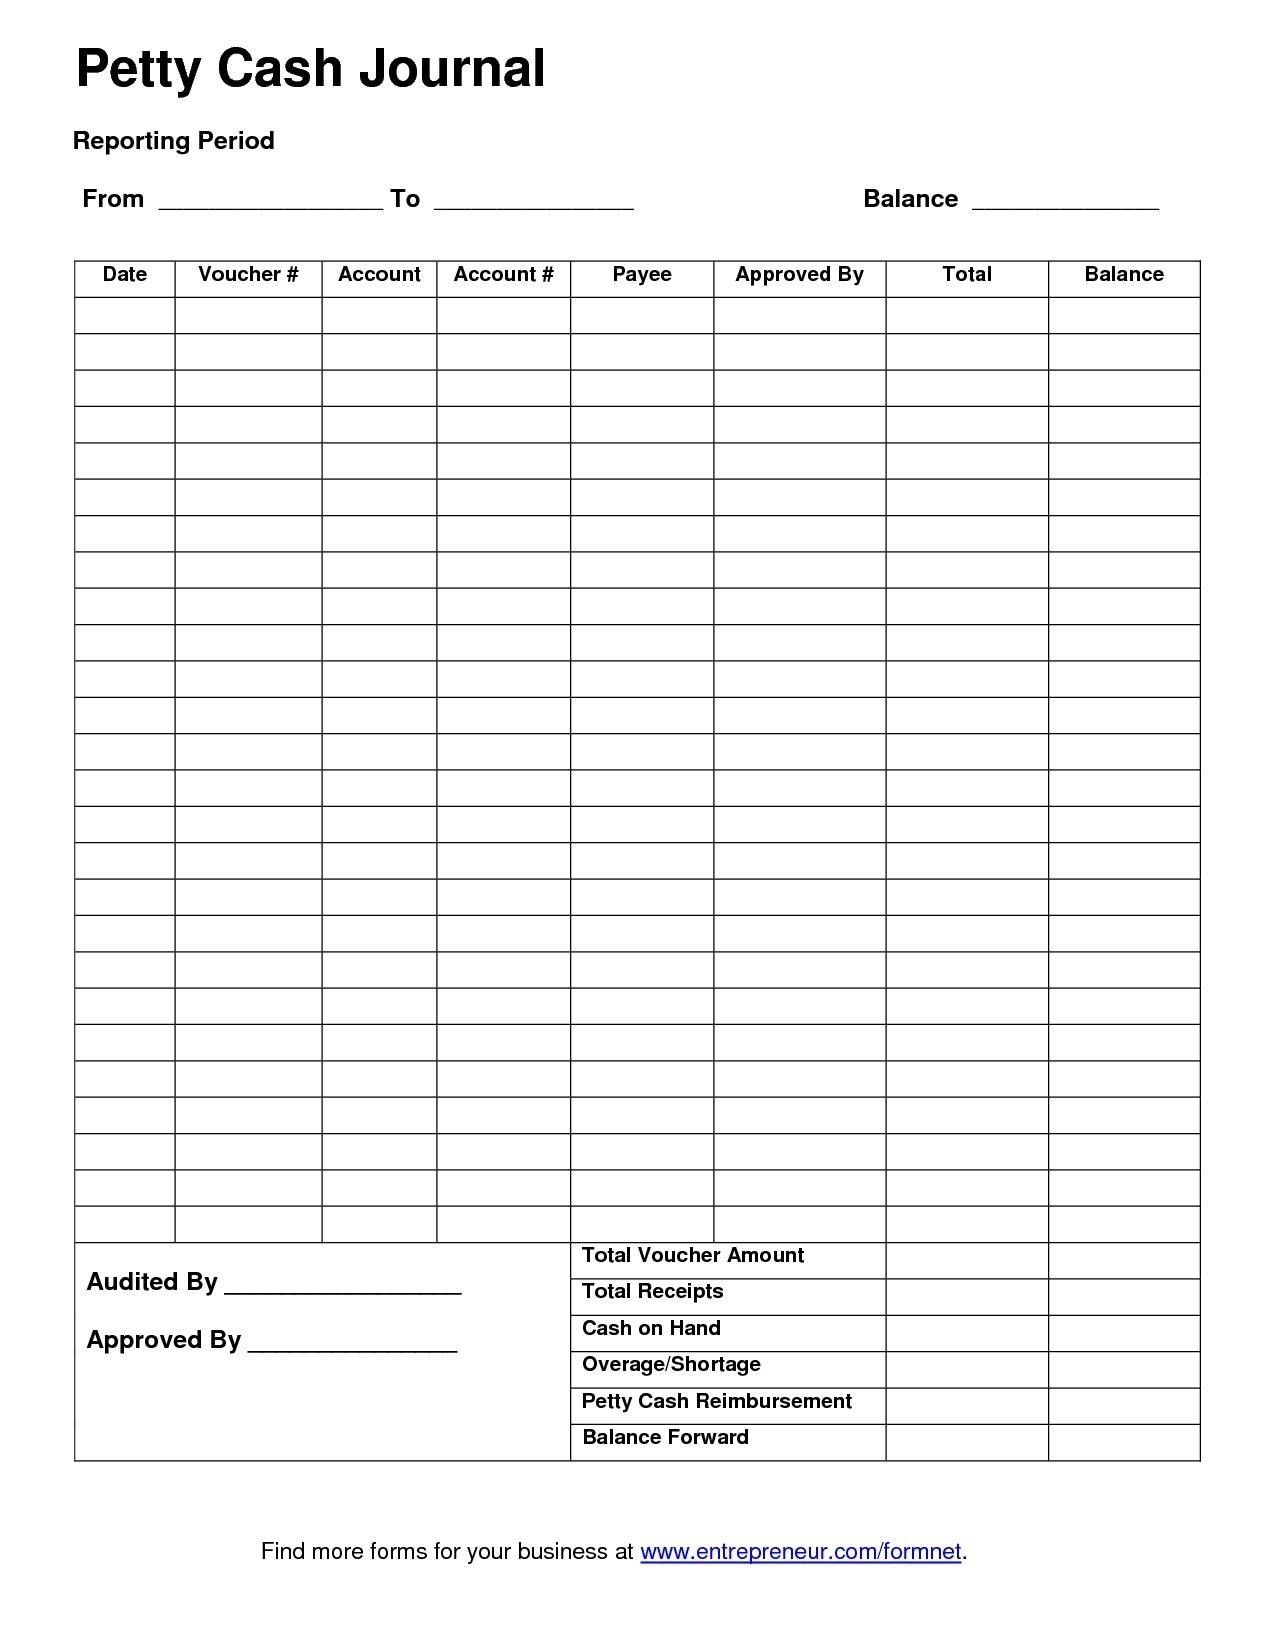 Template For Petty Cash Petty Cash Report Template Excel Z0Fg9Ter - Free Printable Petty Cash Template